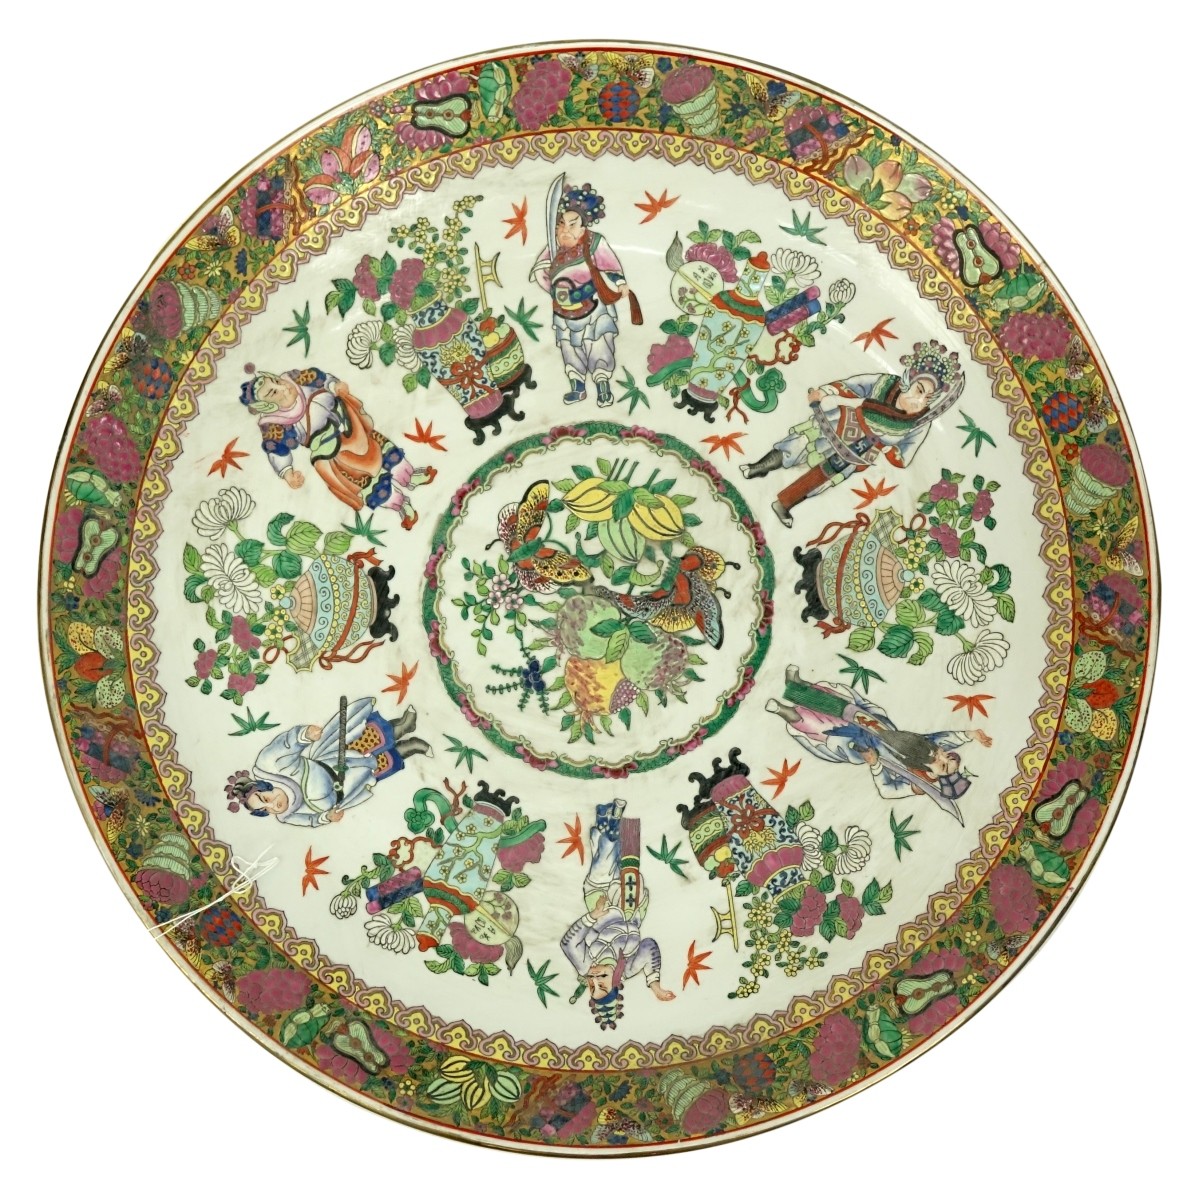 Massive Chinese Famille Rose Porcelain Charger